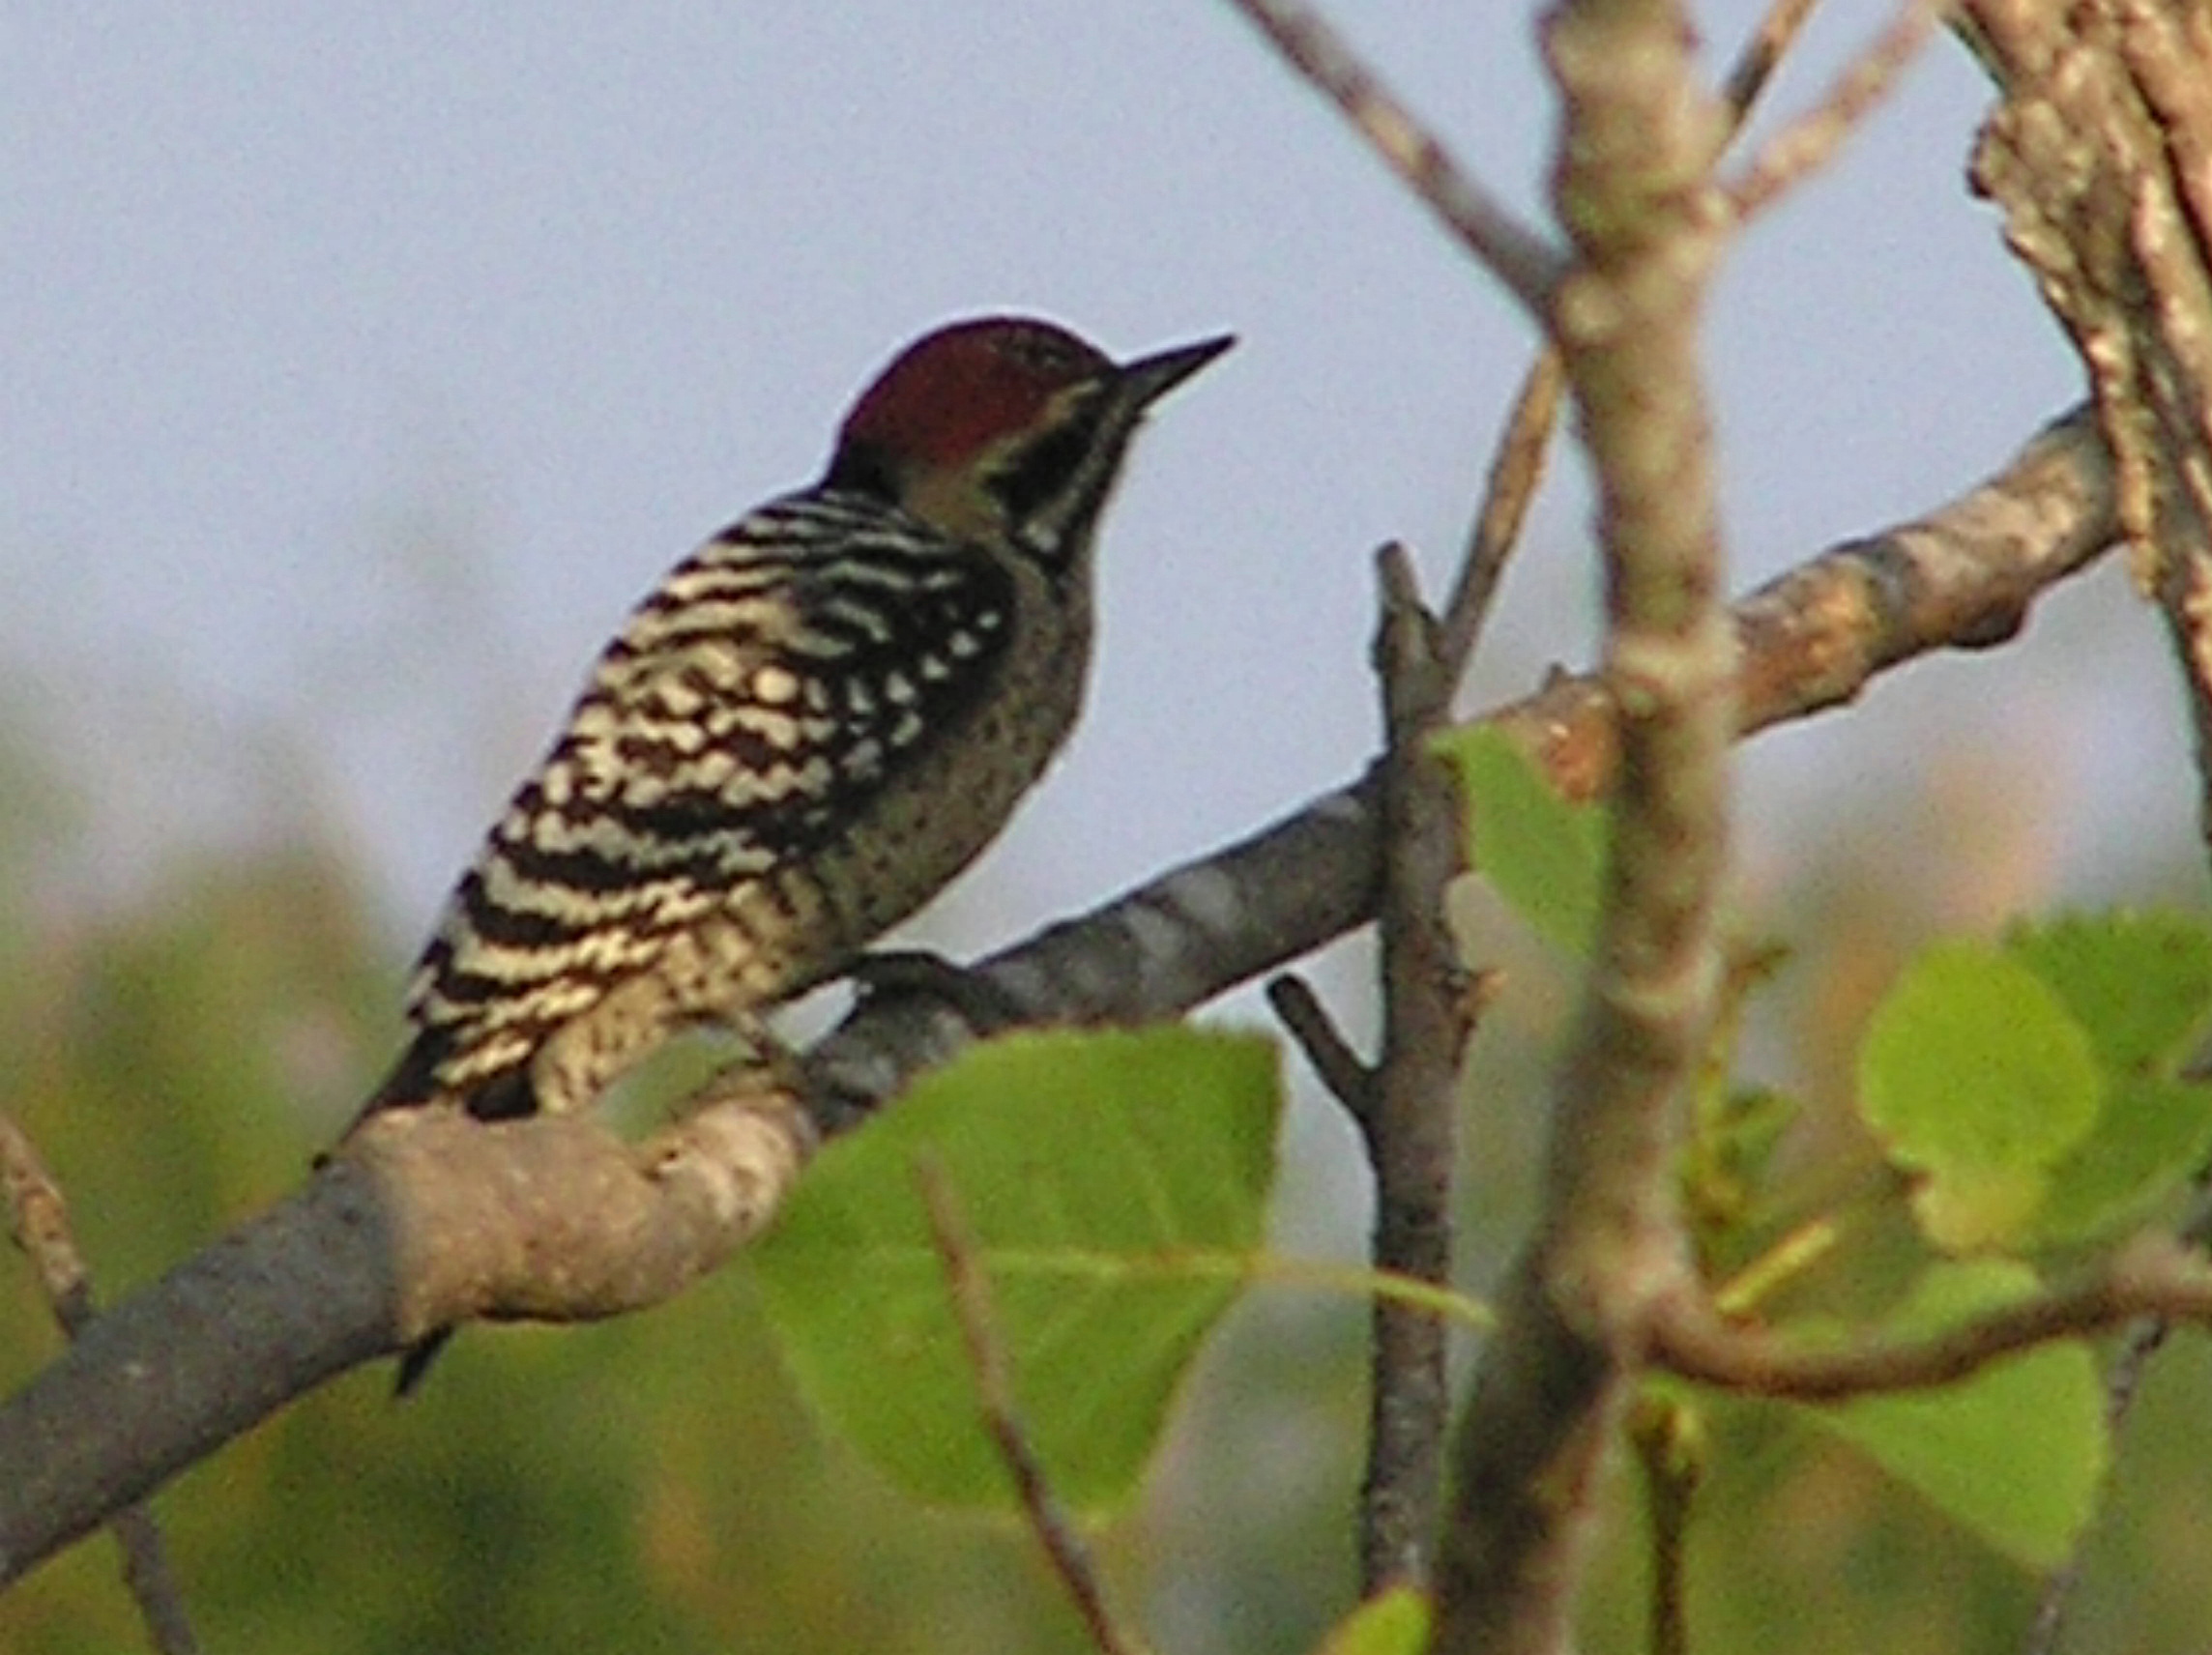 Click picture to see more Ladder-backed Woodpeckers.